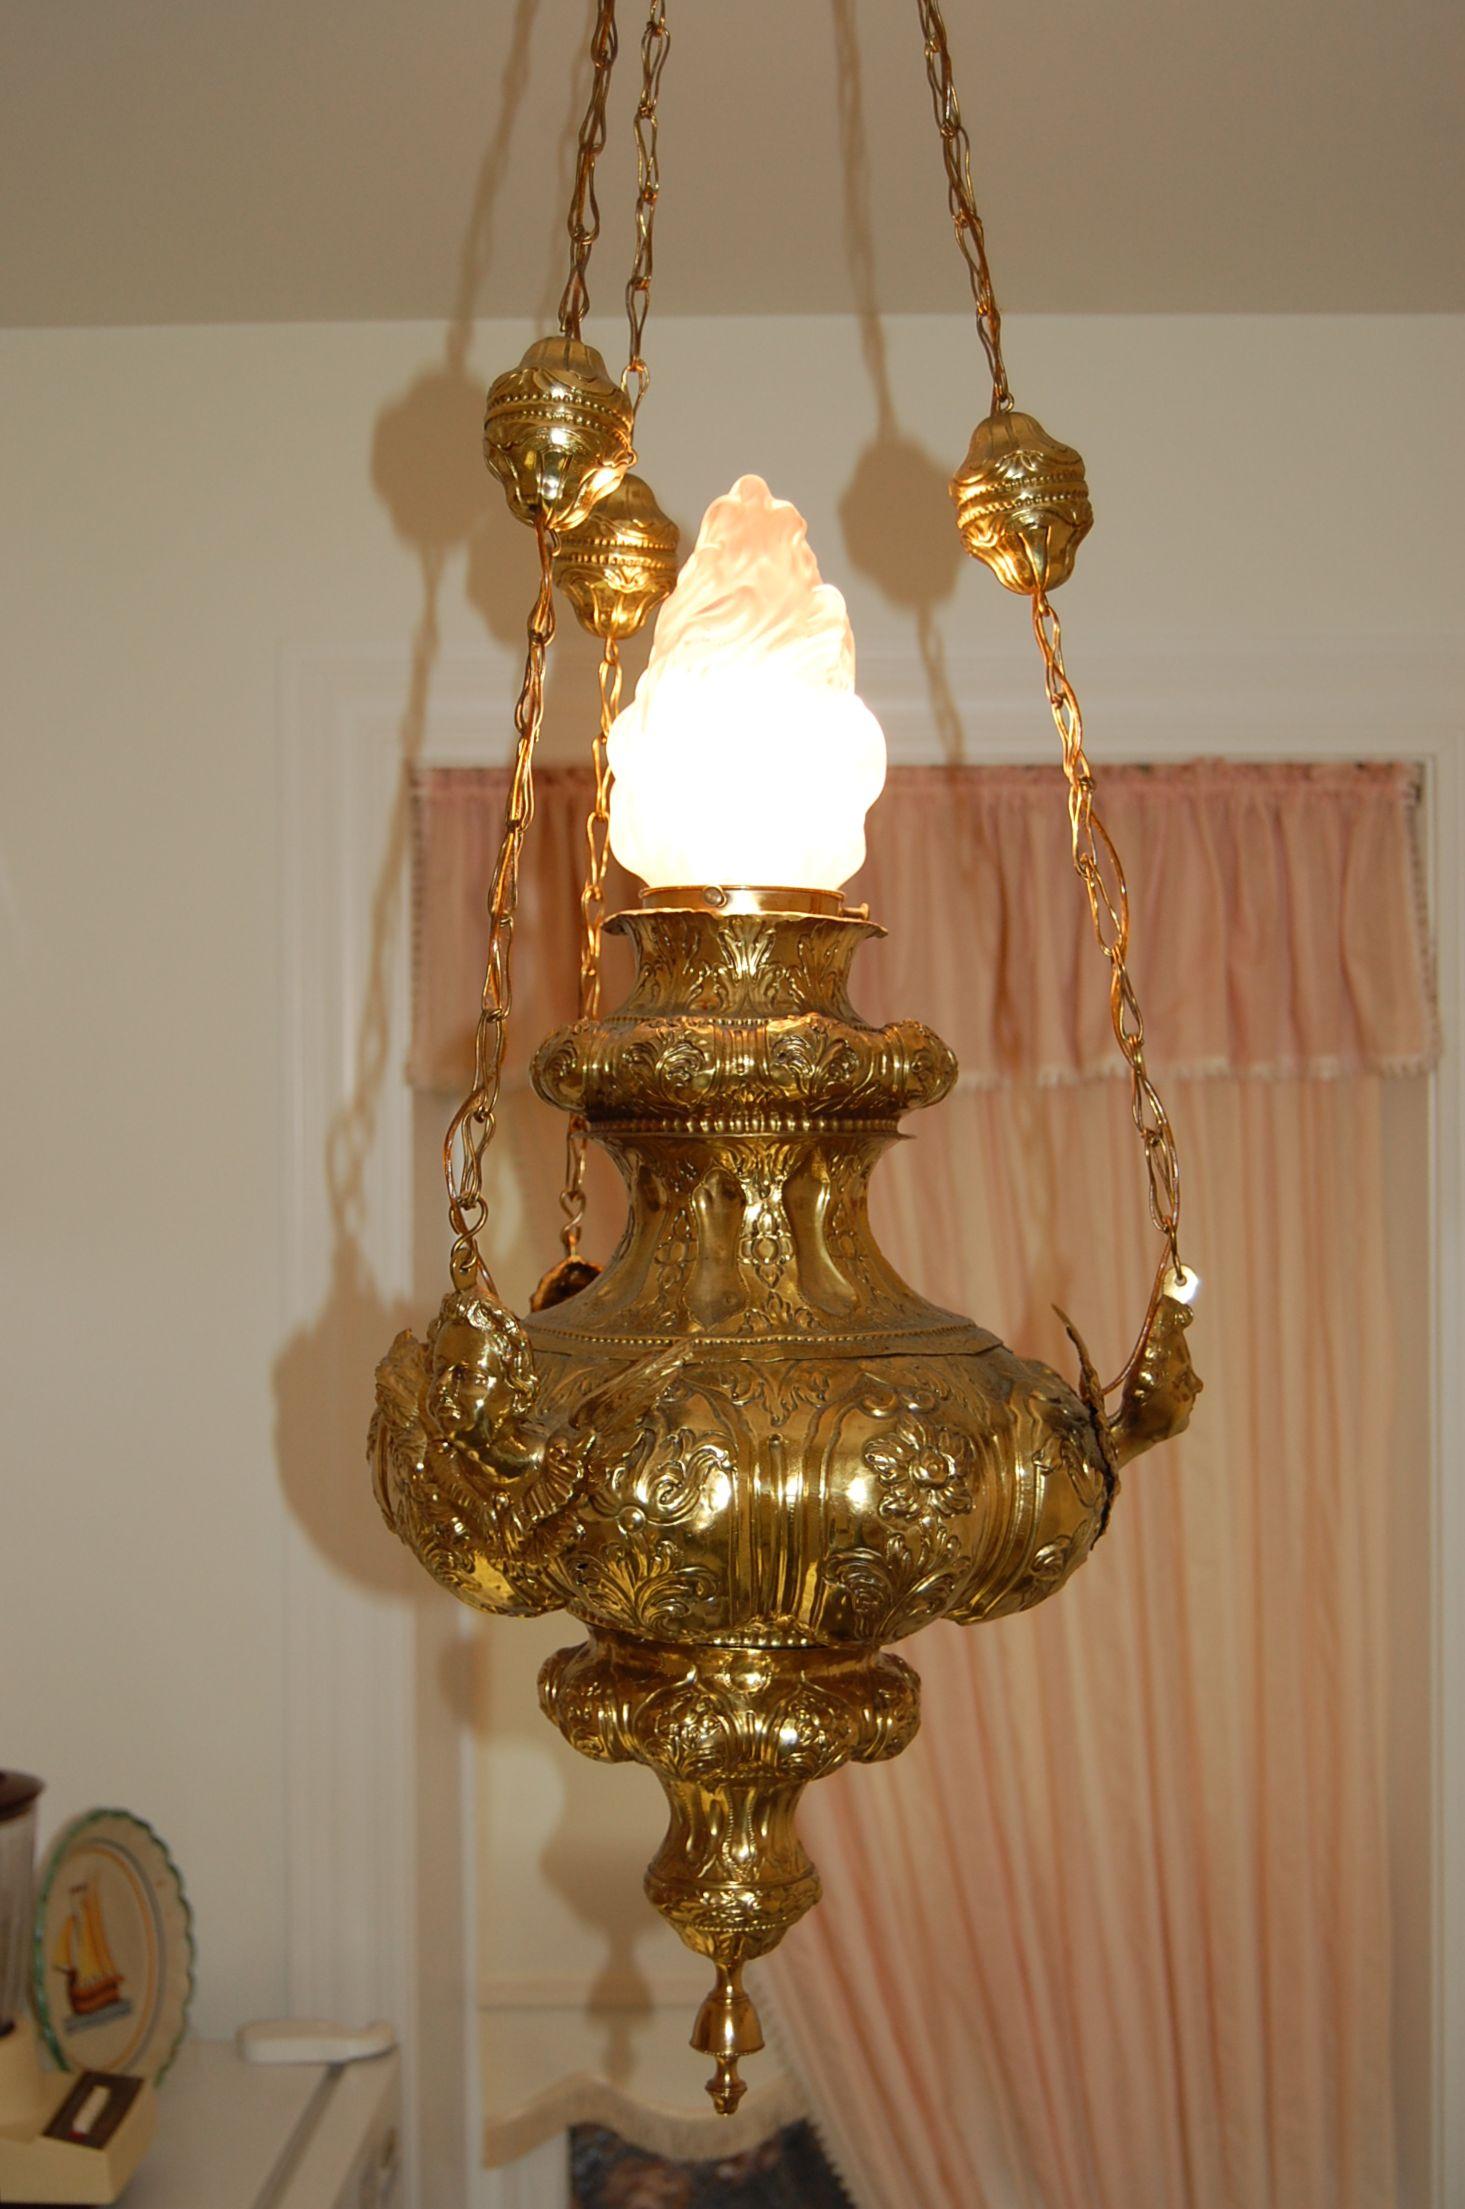 19th century Church Sanctuary lamp chandelier, a Repoussé brass circular hanging church lantern delicately decorated with three brass angels. Excellent condition with newer wiring, cleaned polished and lacquered. 48 inches long.